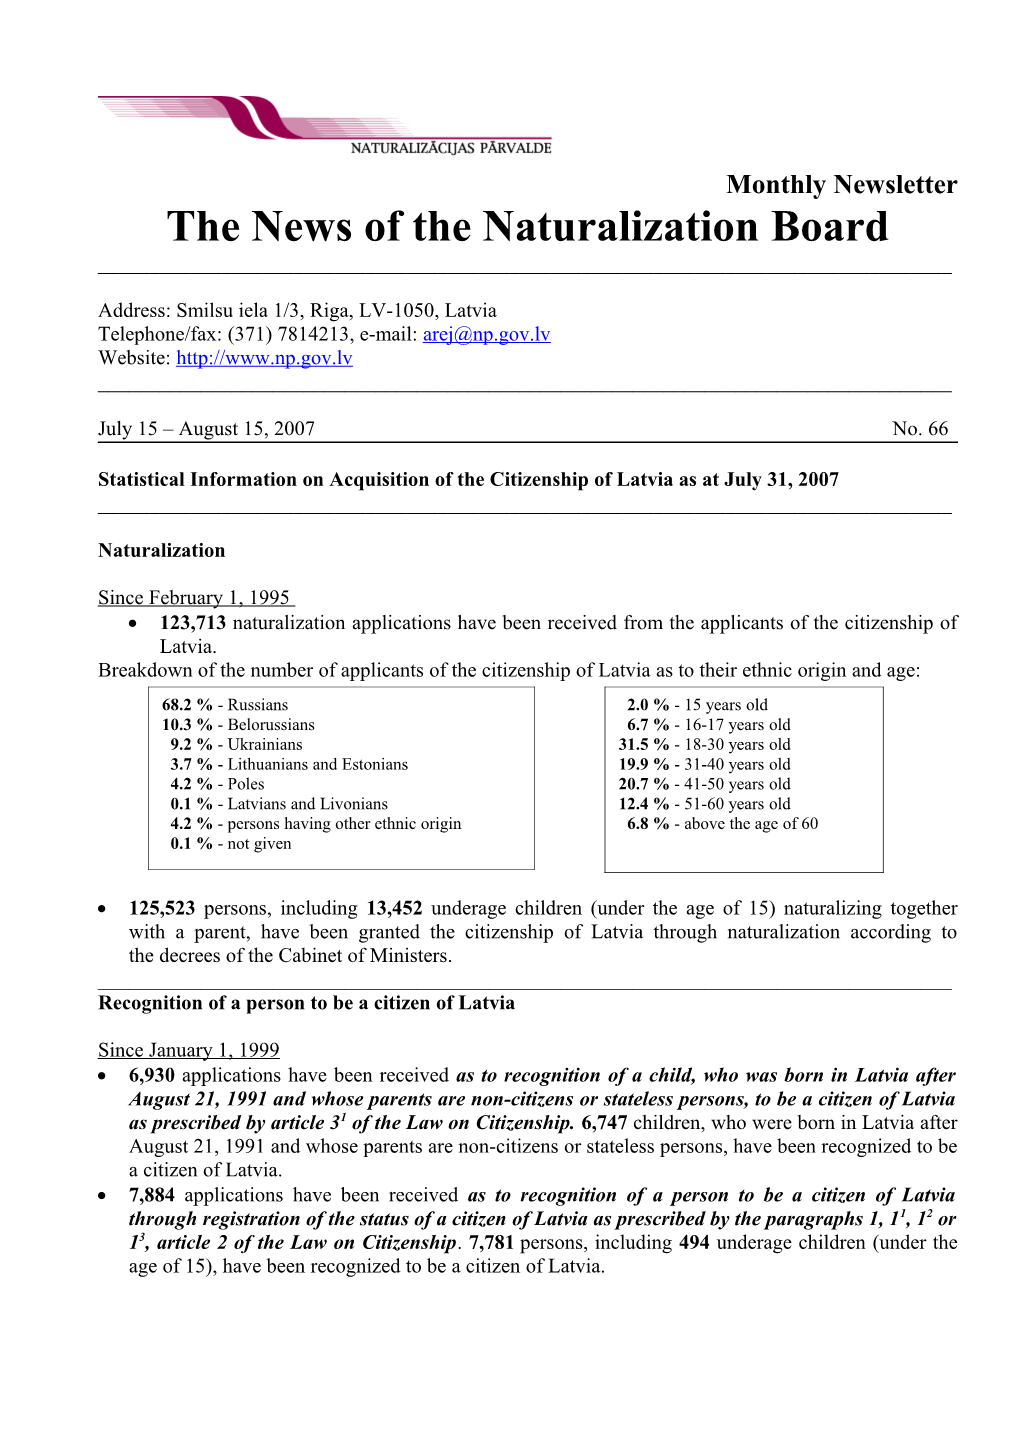 The News of the Naturalization Board